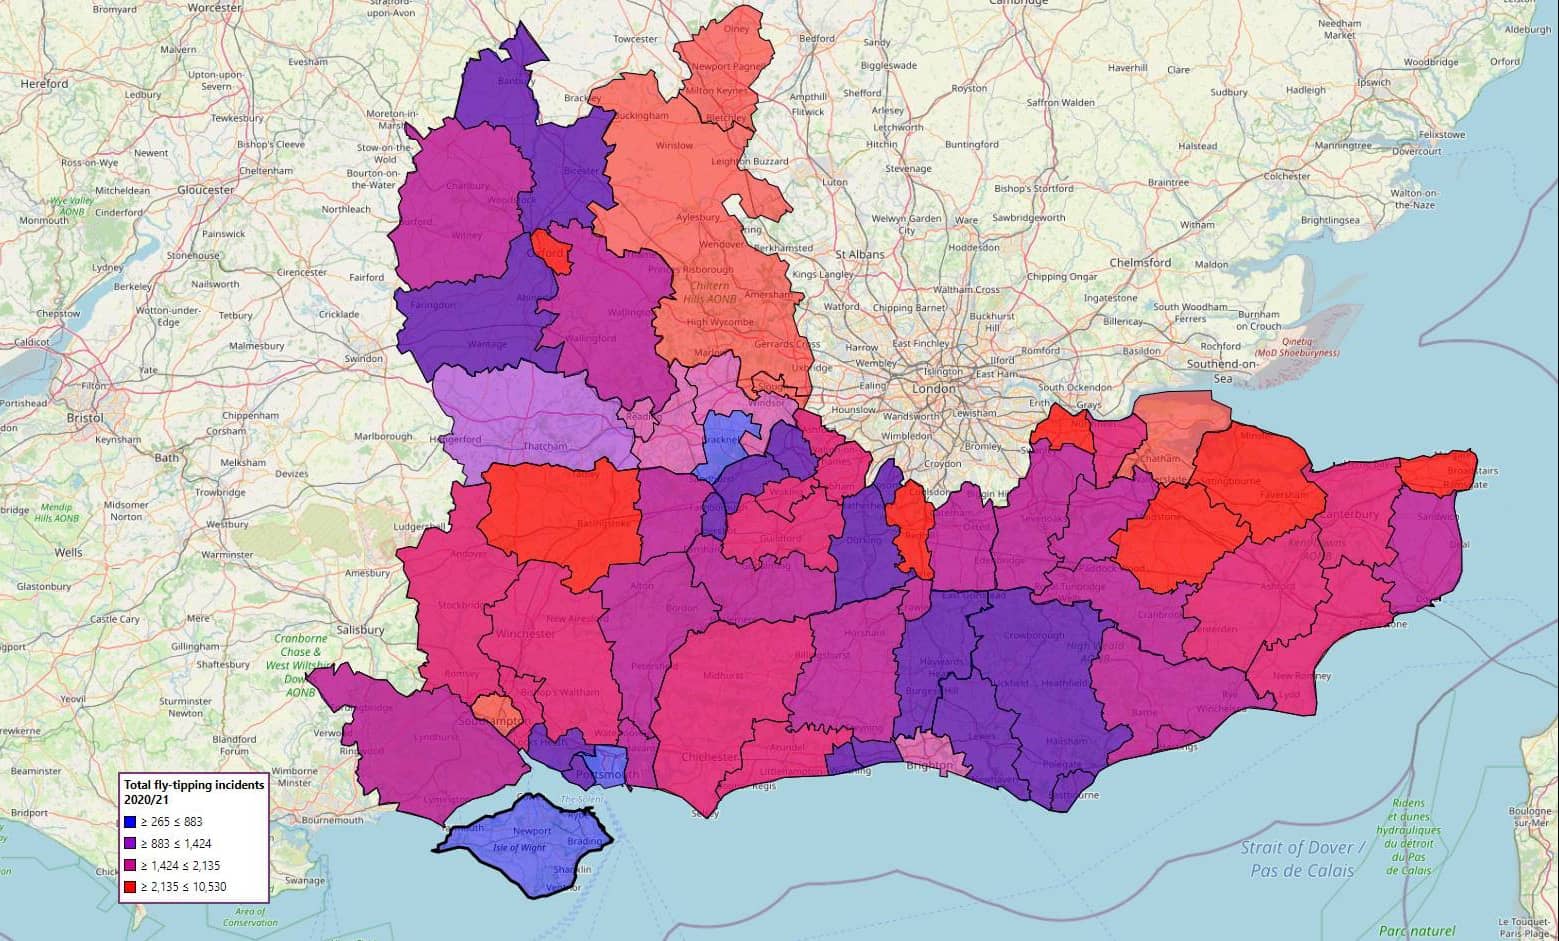 Fly-tipping map in the South East